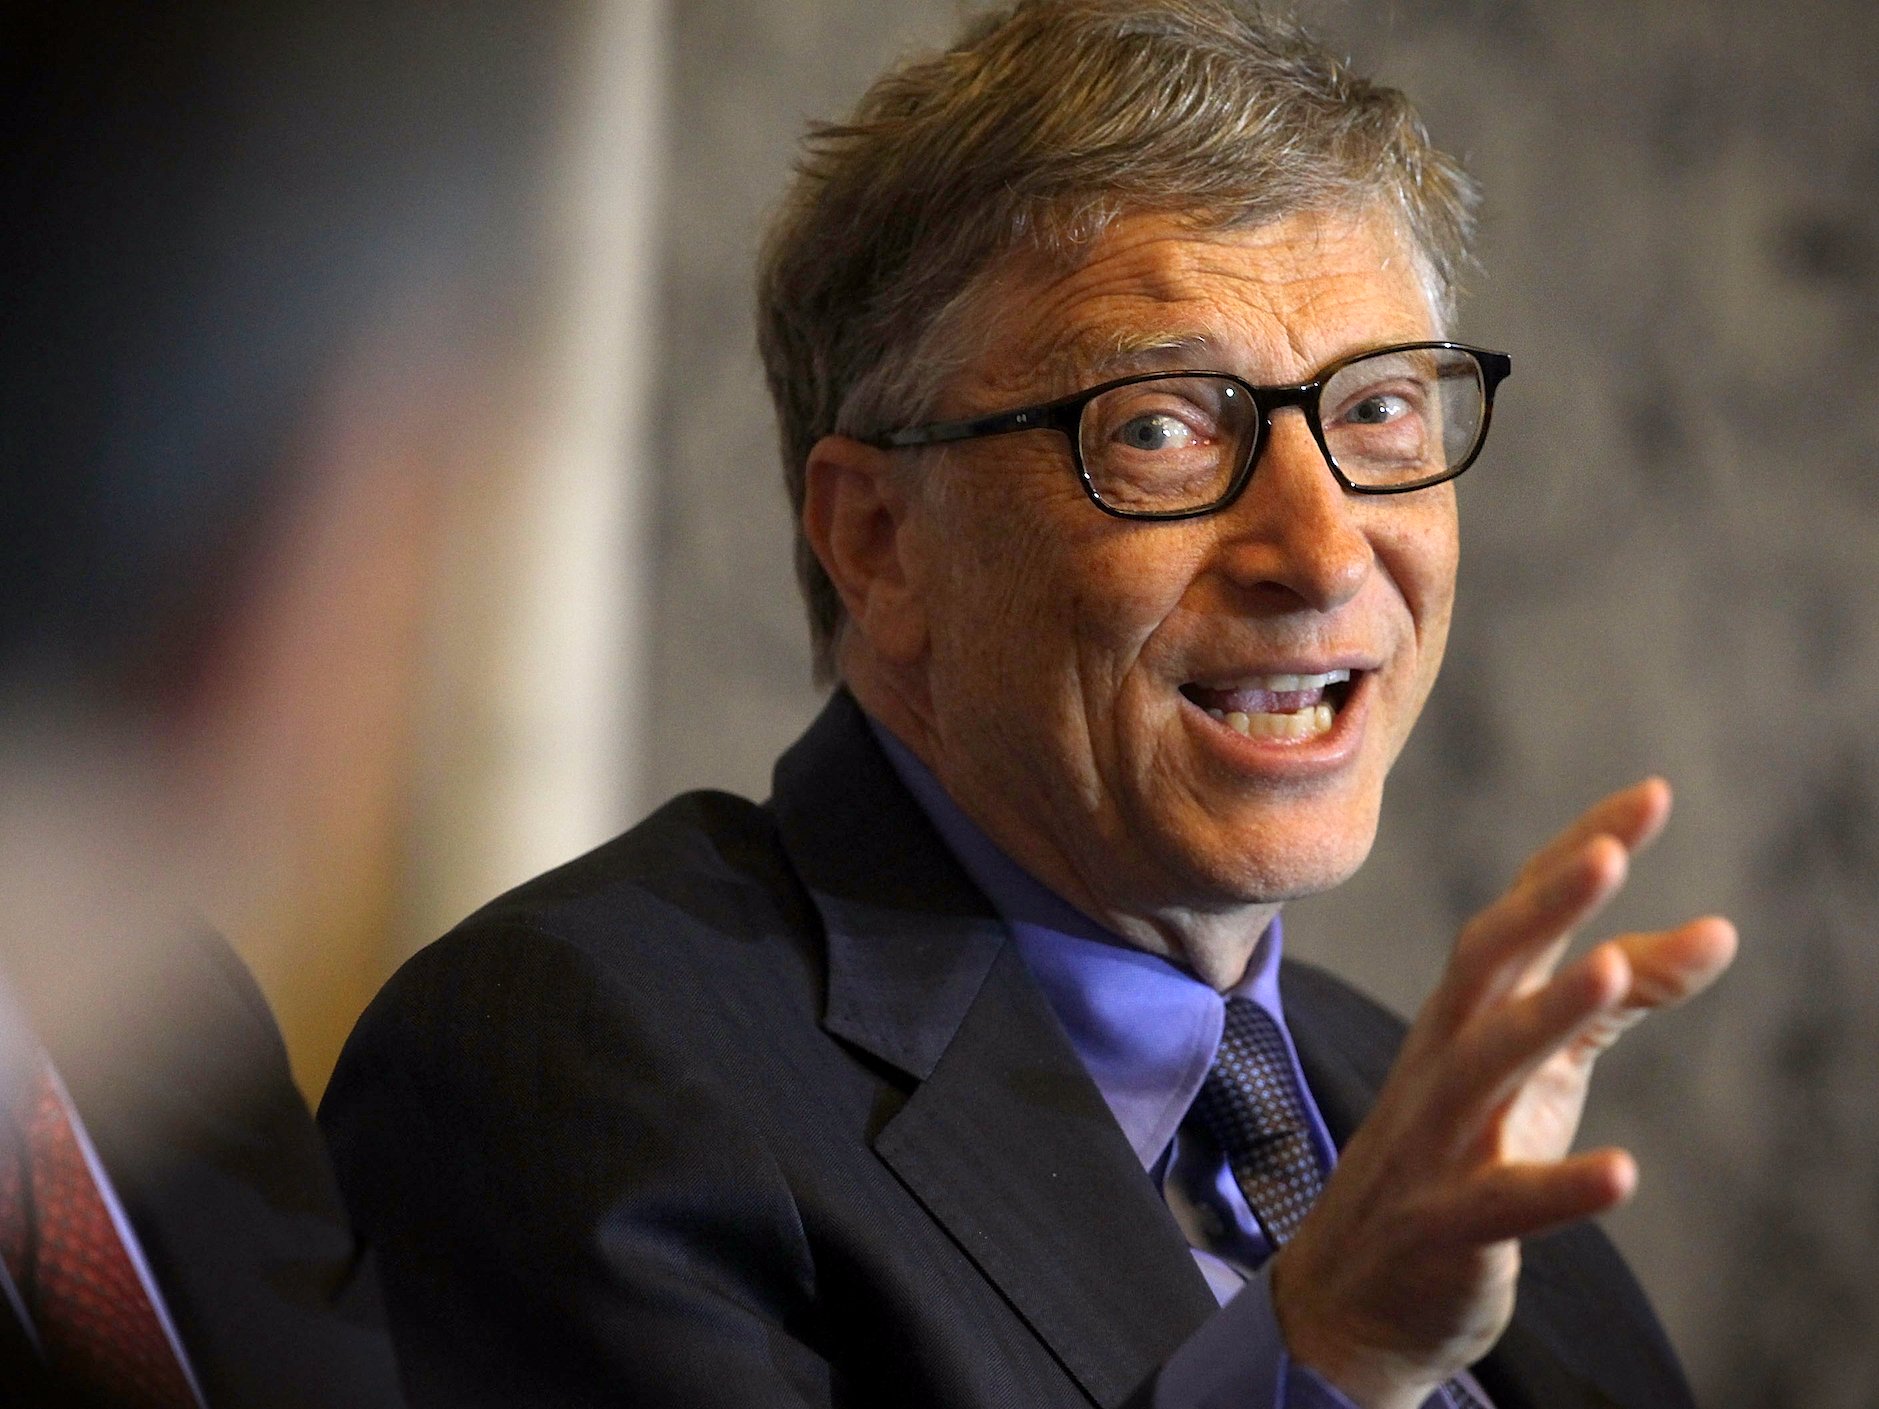 20 inspirational quotes from top billionaires